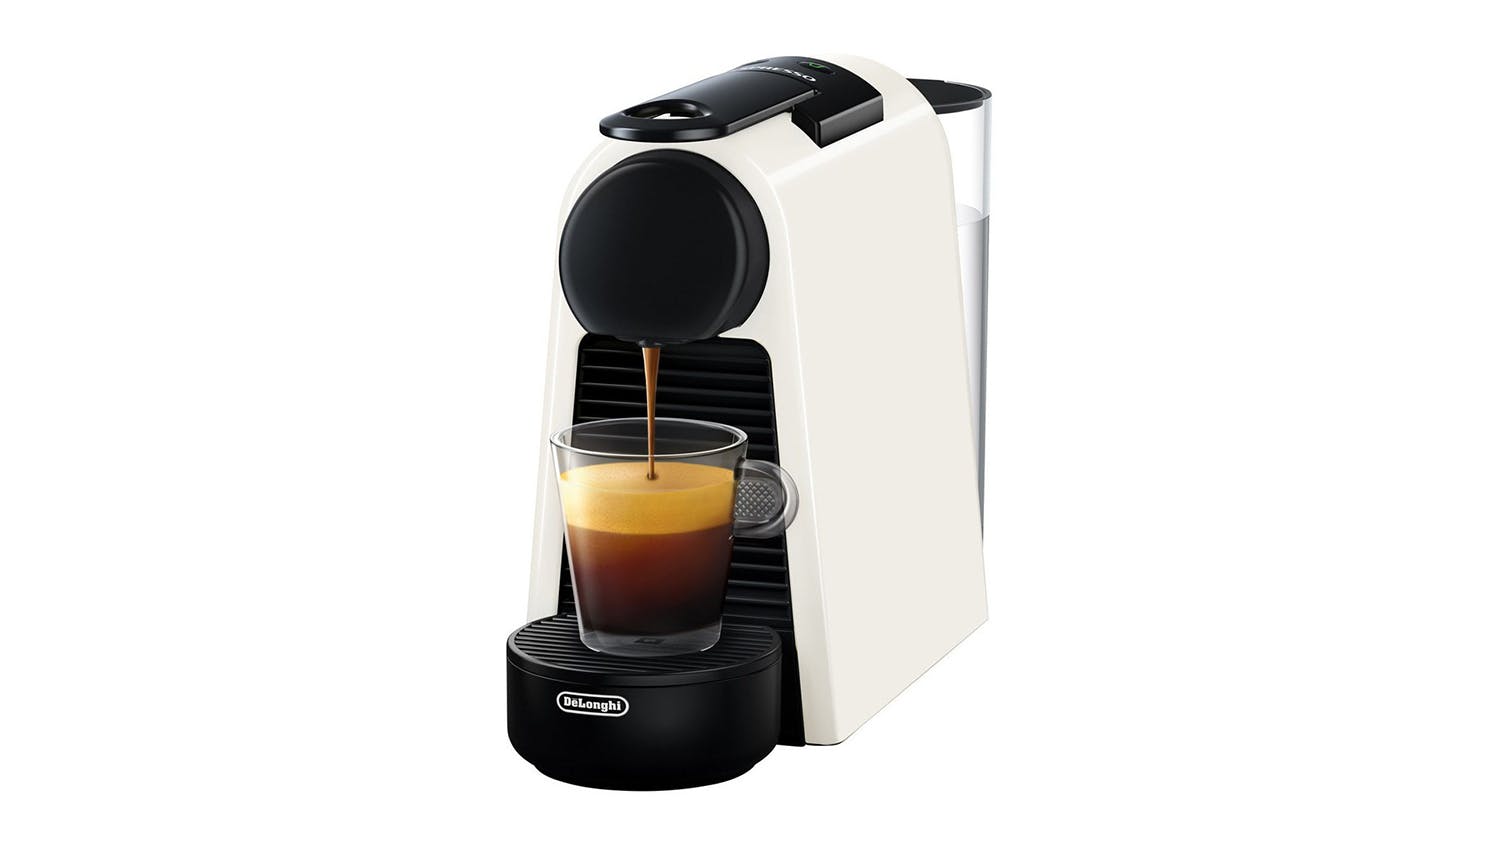 The Nespresso Inissia is on sale for $64 off on